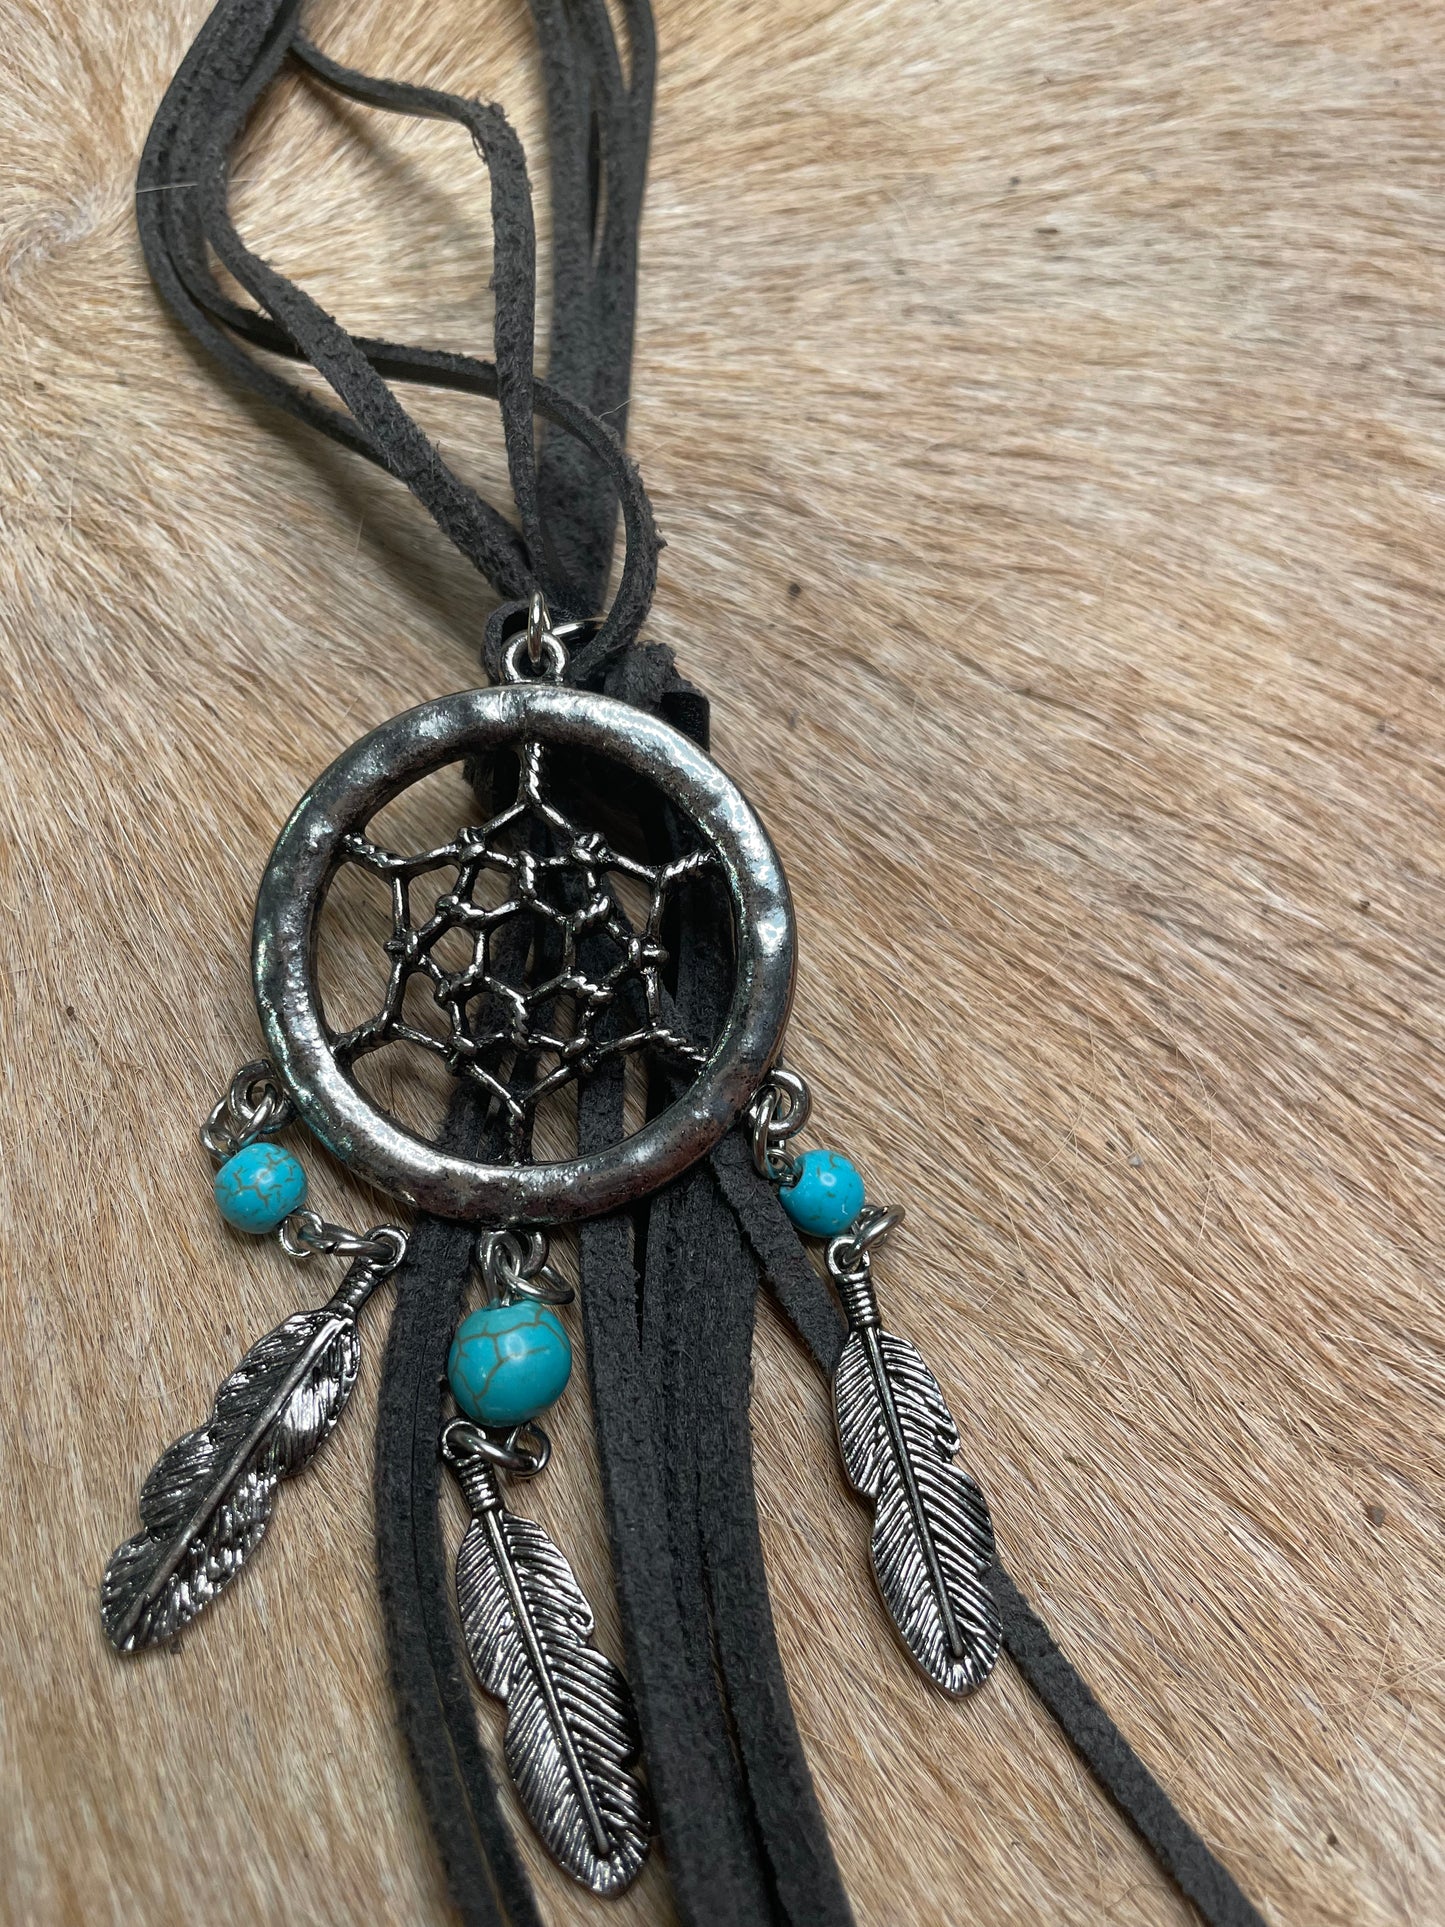 LEATHER STRIPS WITH METAL DREAM CATCHER PENDANT AND FEATHER CHARMS